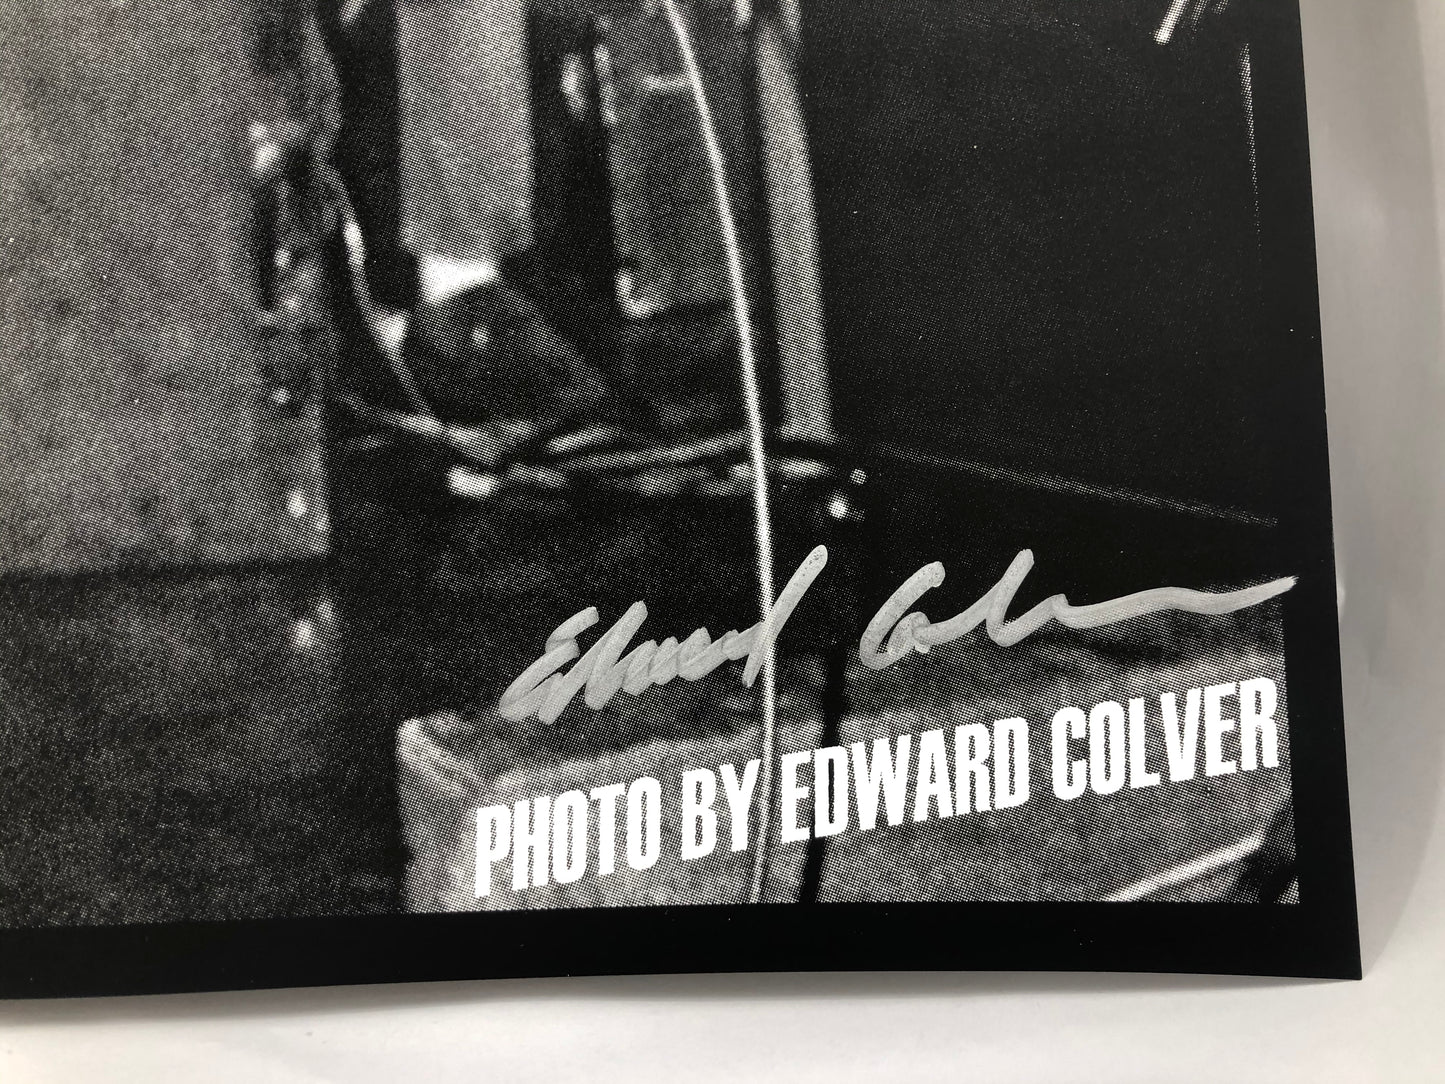 Shirt Killer - Stone cold classic official HR / BAD BRAINS shirt by Edward  Colver featuring his iconic photograph. Available only at  shirtkiller.com/hr • @therealofficialhr @edwardcolver #hr #humanrights # badbrains #edwardcolver